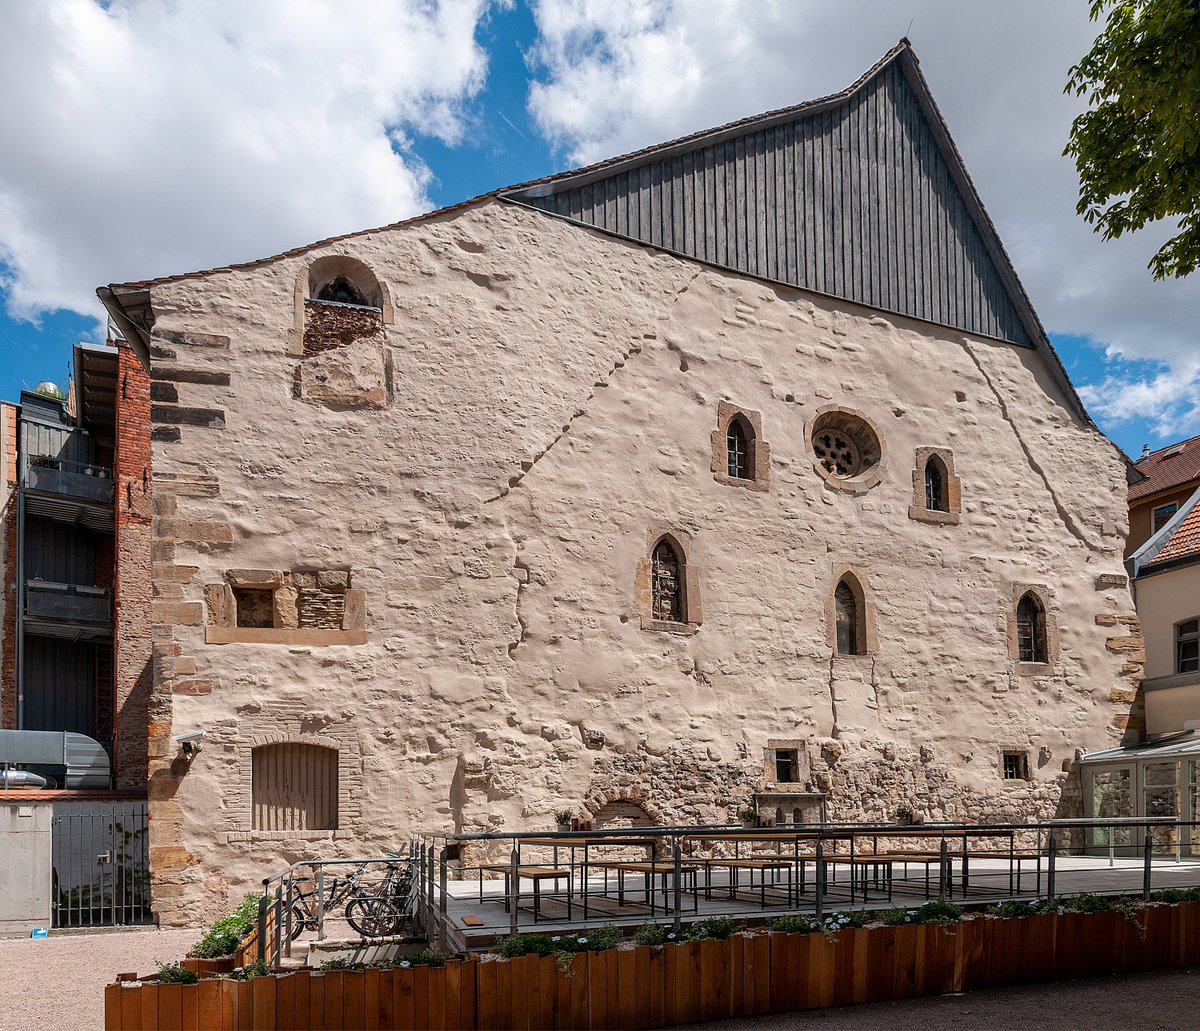 Parts of the Alte Synagoge in Erfurt, Germany, date back to the late 11th century. It is thought to be the oldest intact shul in Europe—and the world.